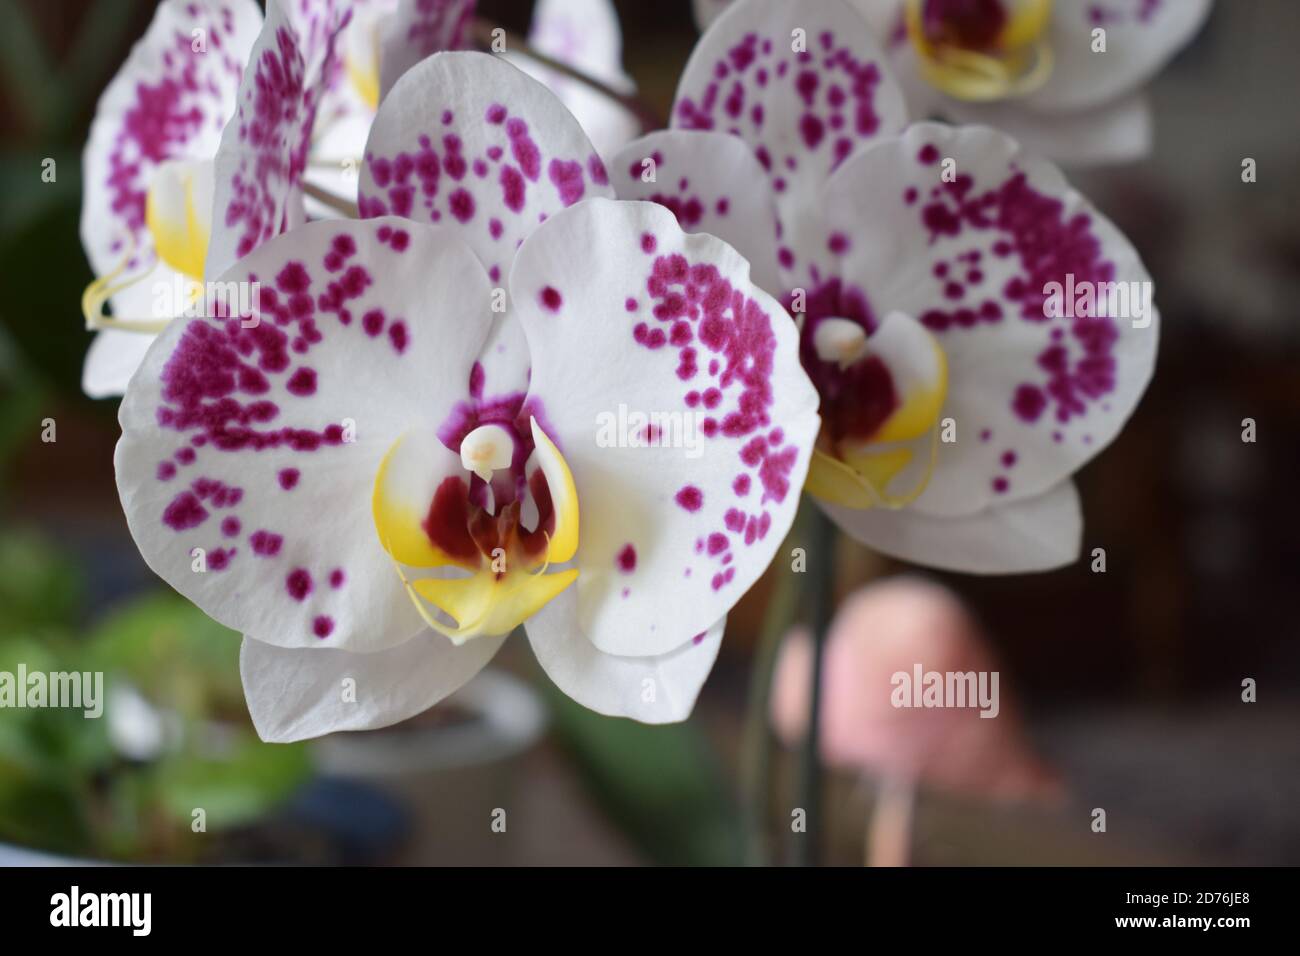 white orchid with pink dots Stock Photo